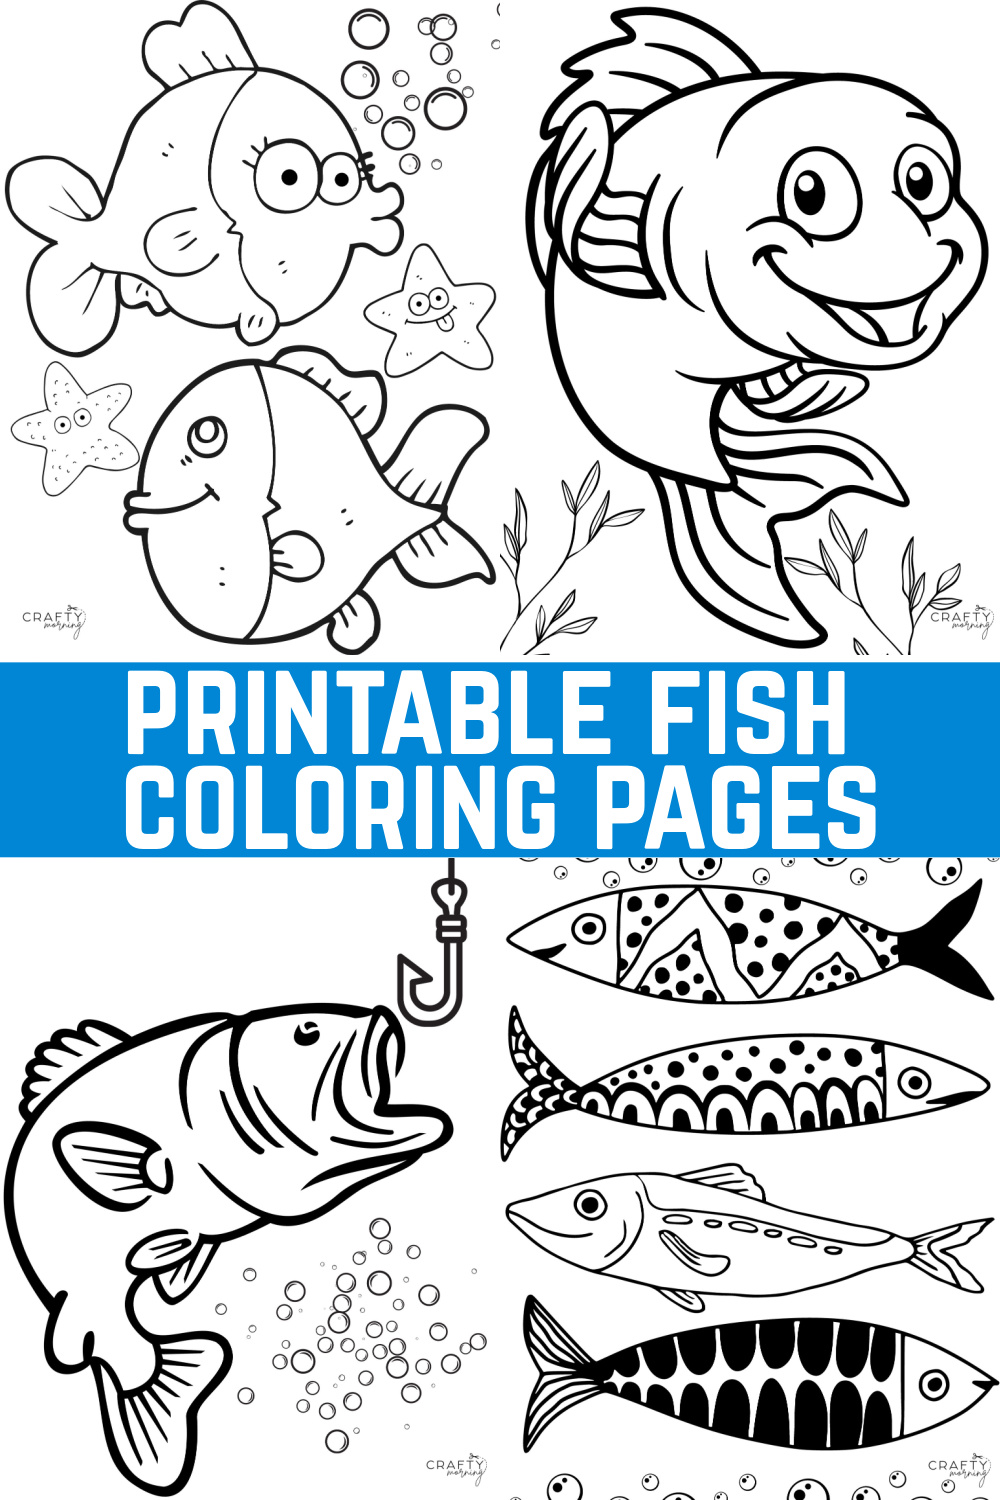 Fish Coloring Pages - 30 Printable Sheets - Easy Peasy and Fun